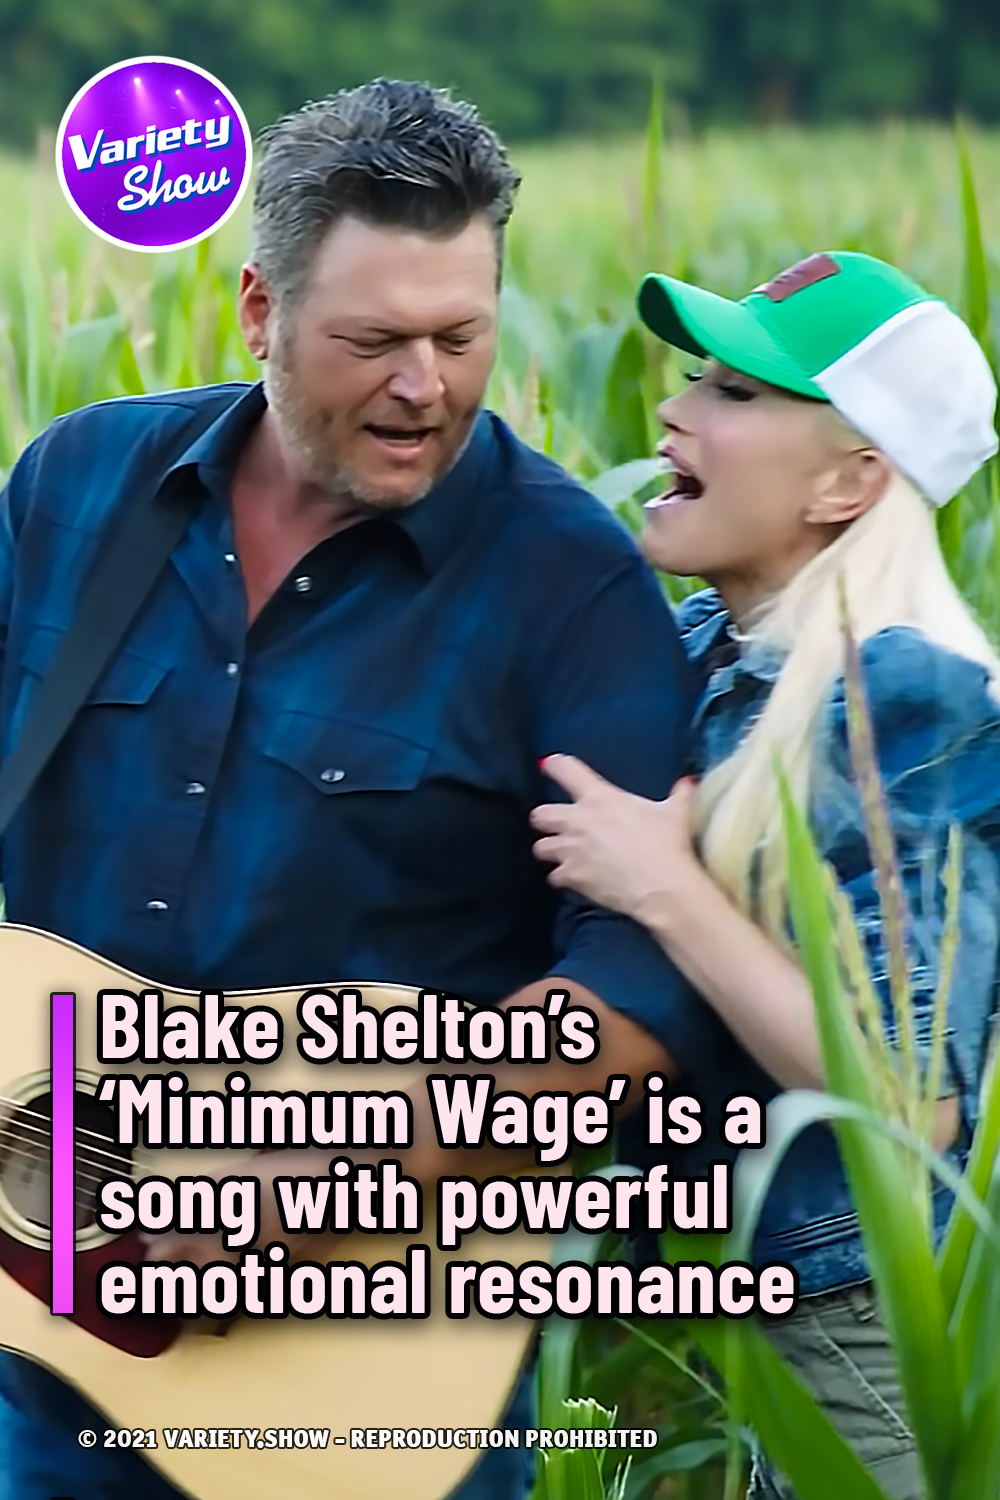 Blake Shelton’s ‘Minimum Wage’ is a song with powerful emotional resonance